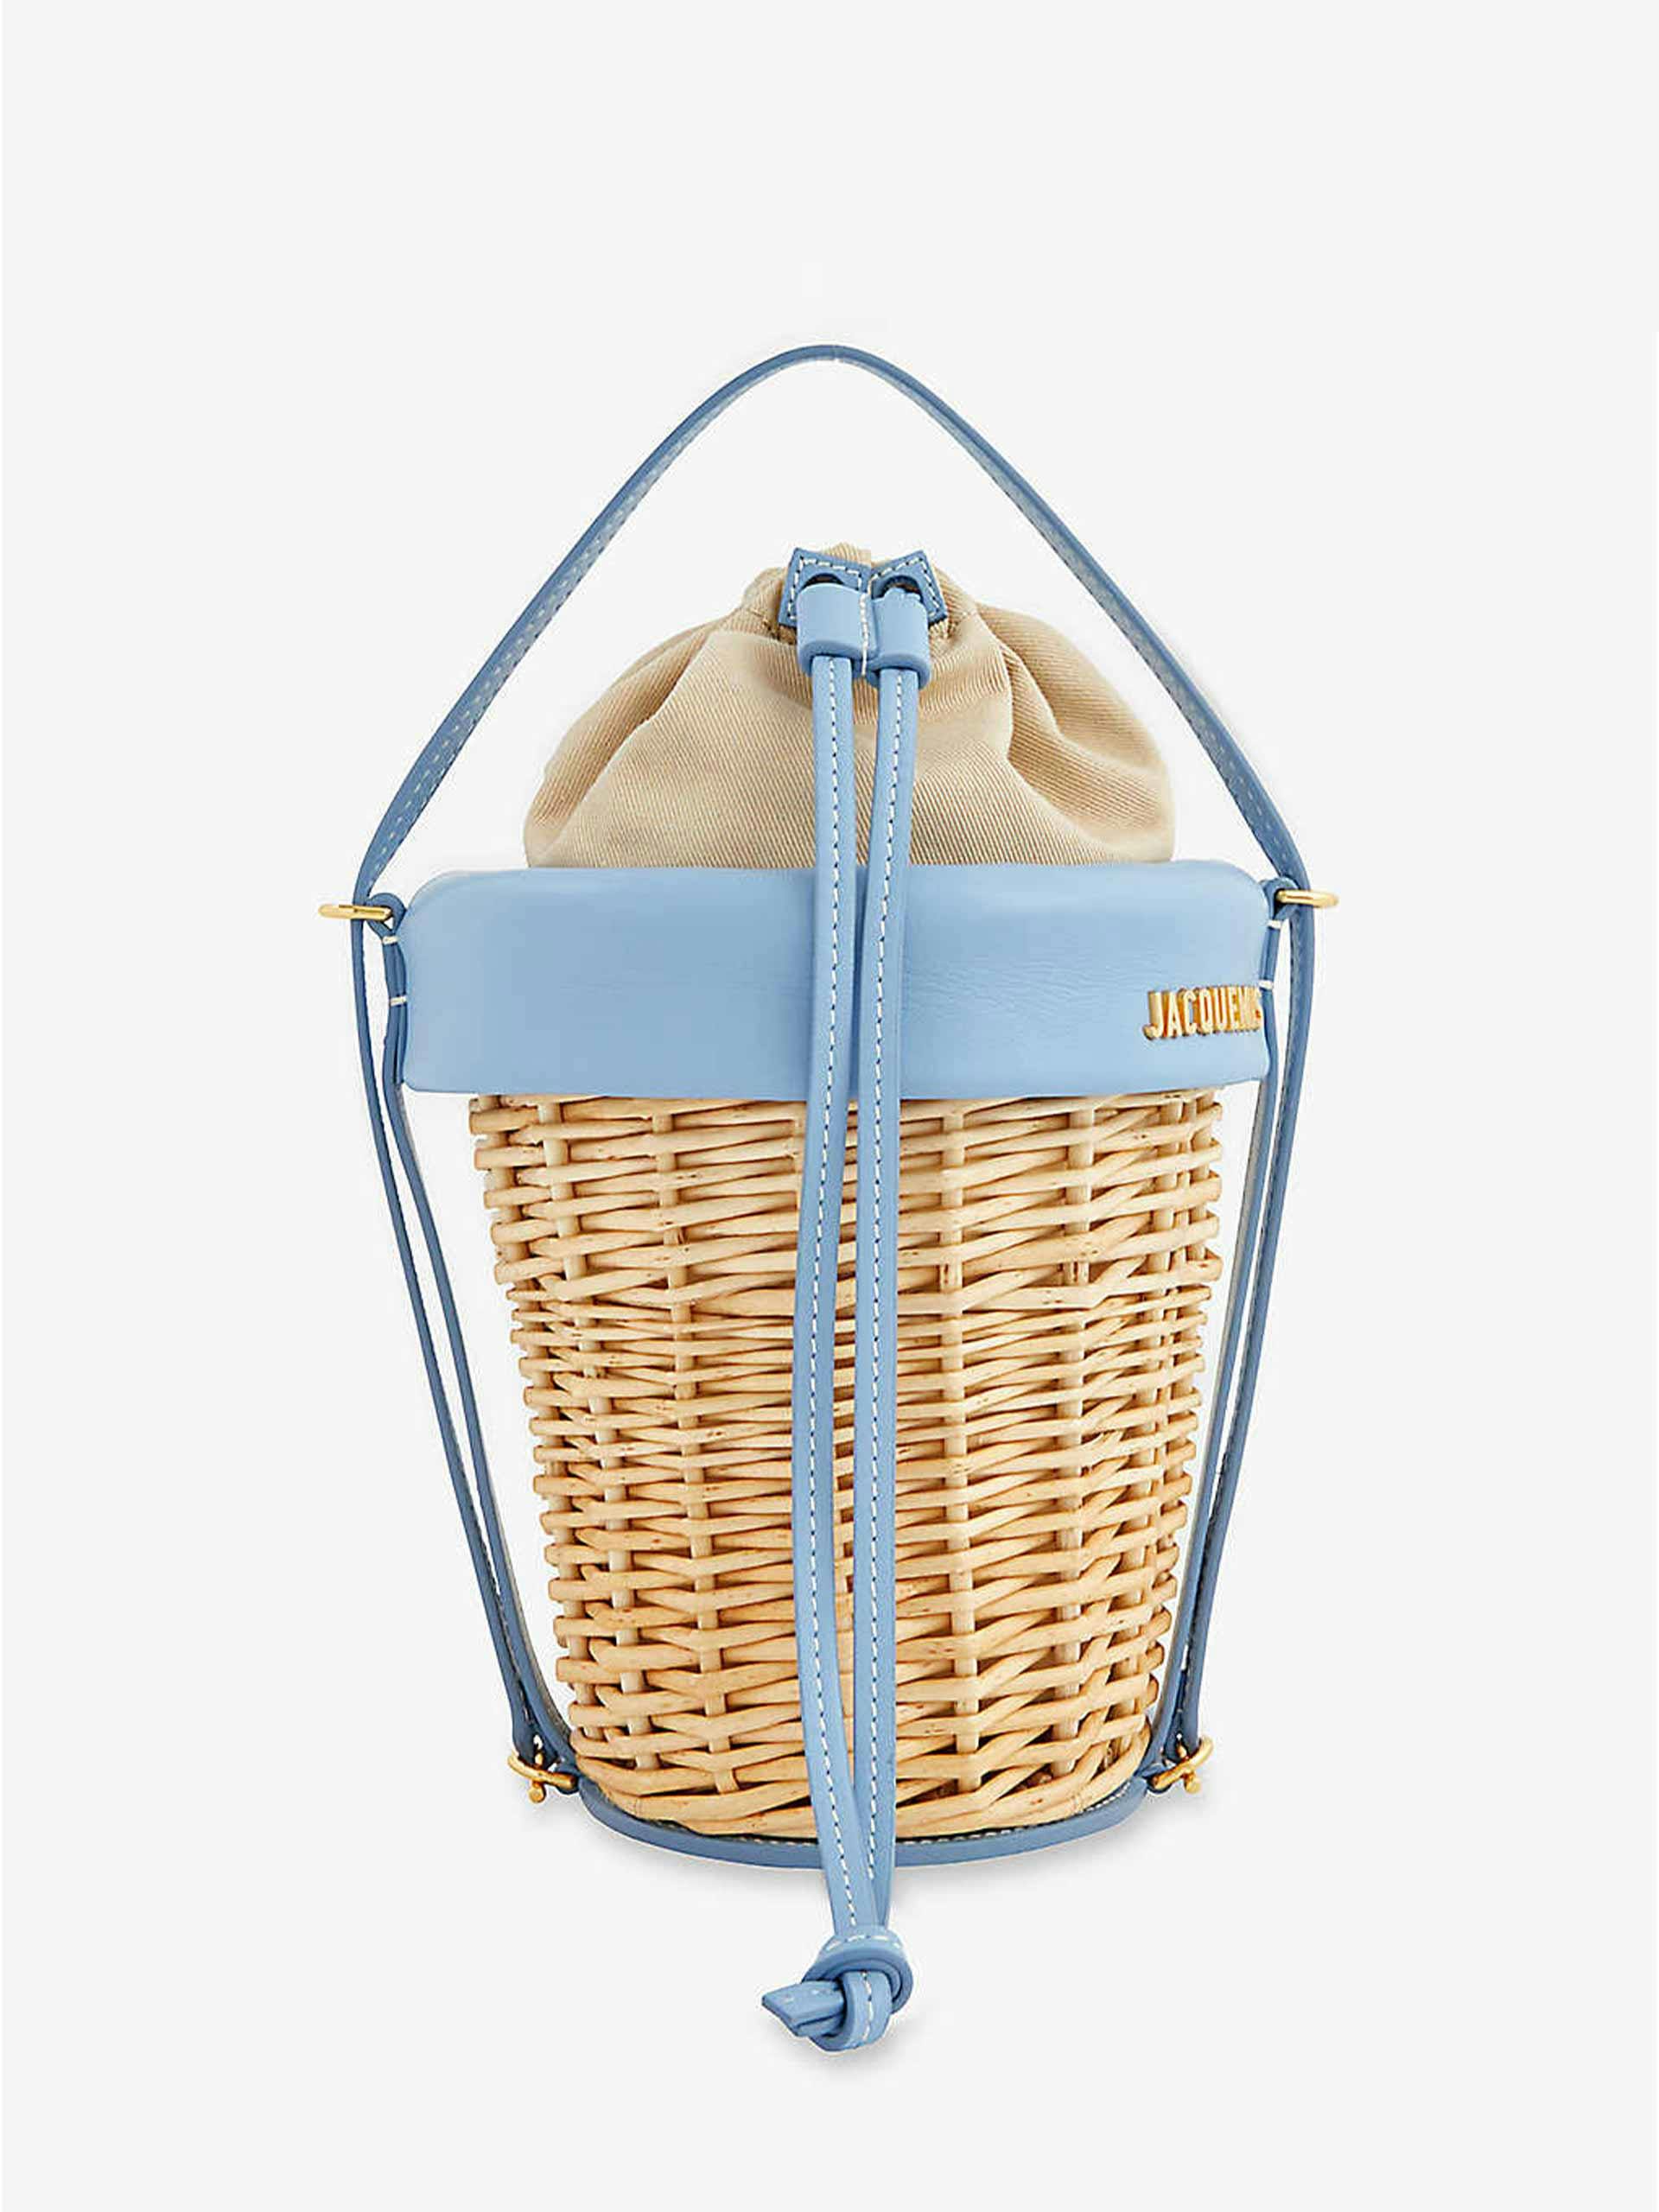 Wicker and leather tote bag